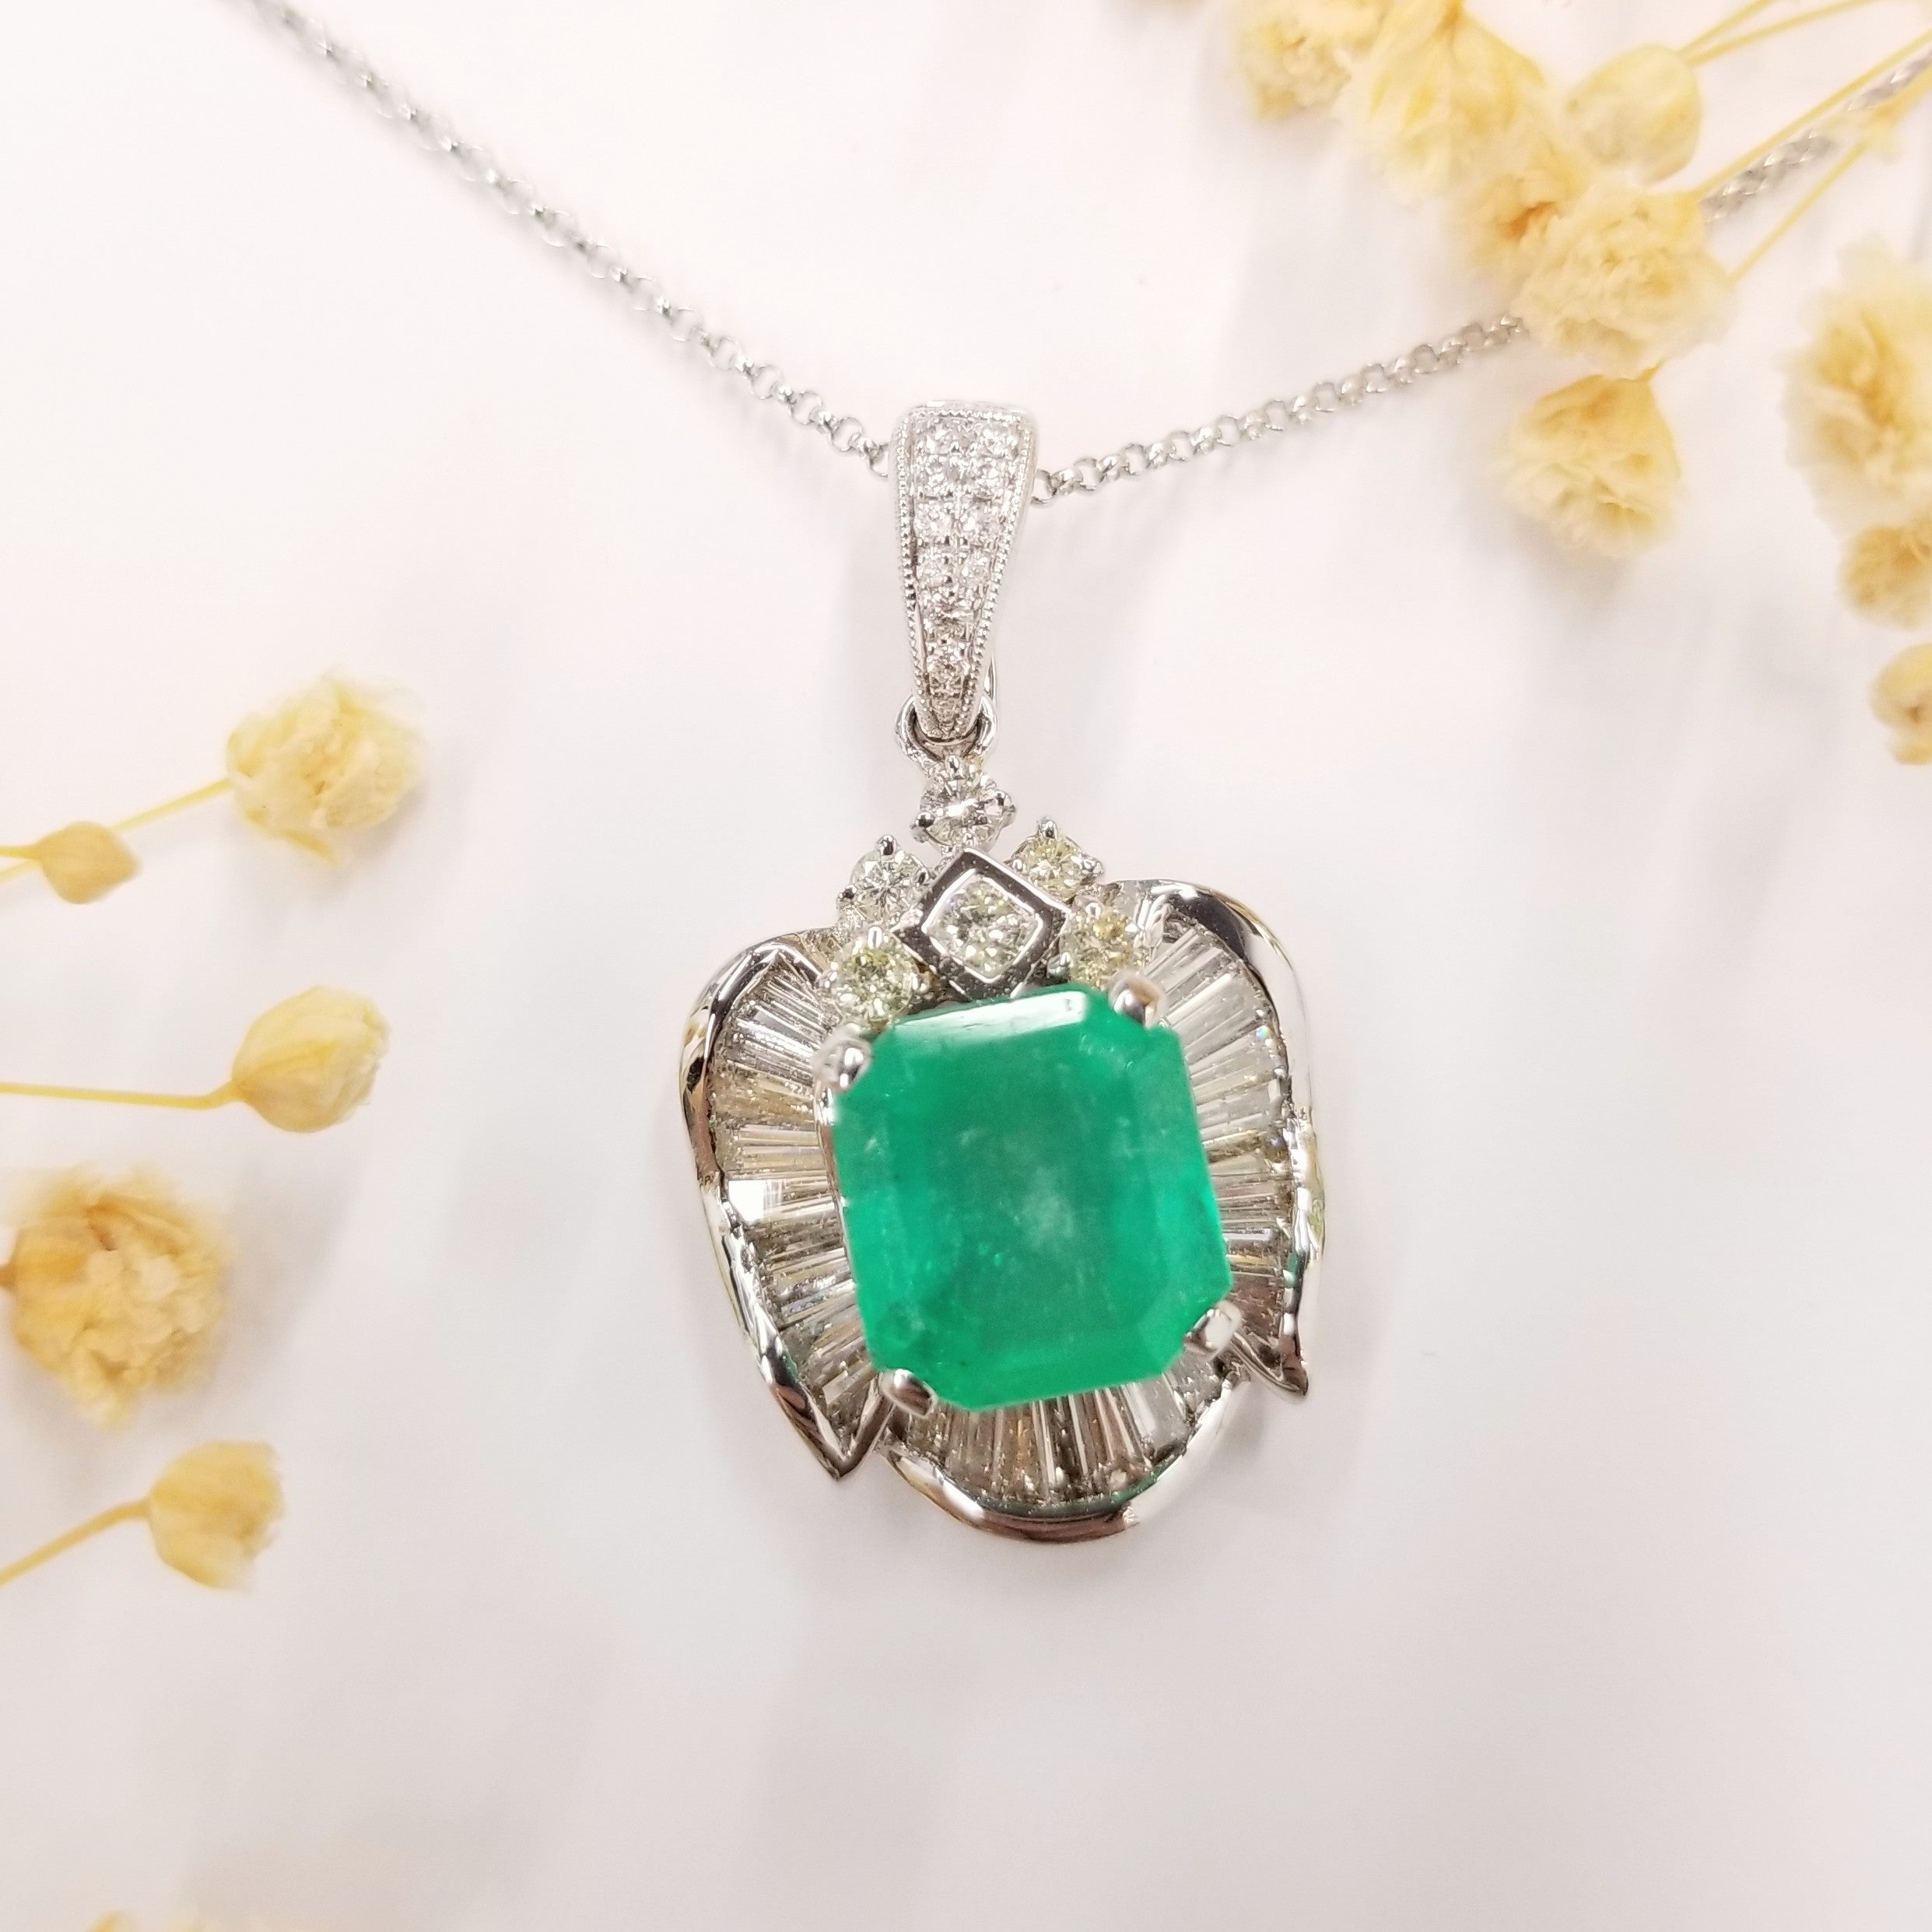 This exquisite pendant features a stunning IGI certified 3.97 carat Colombian Emerald in an elegant emerald shape. The emerald showcases a beautiful vibrant green color, known for its exceptional quality. This gemstone is sourced from the renowned